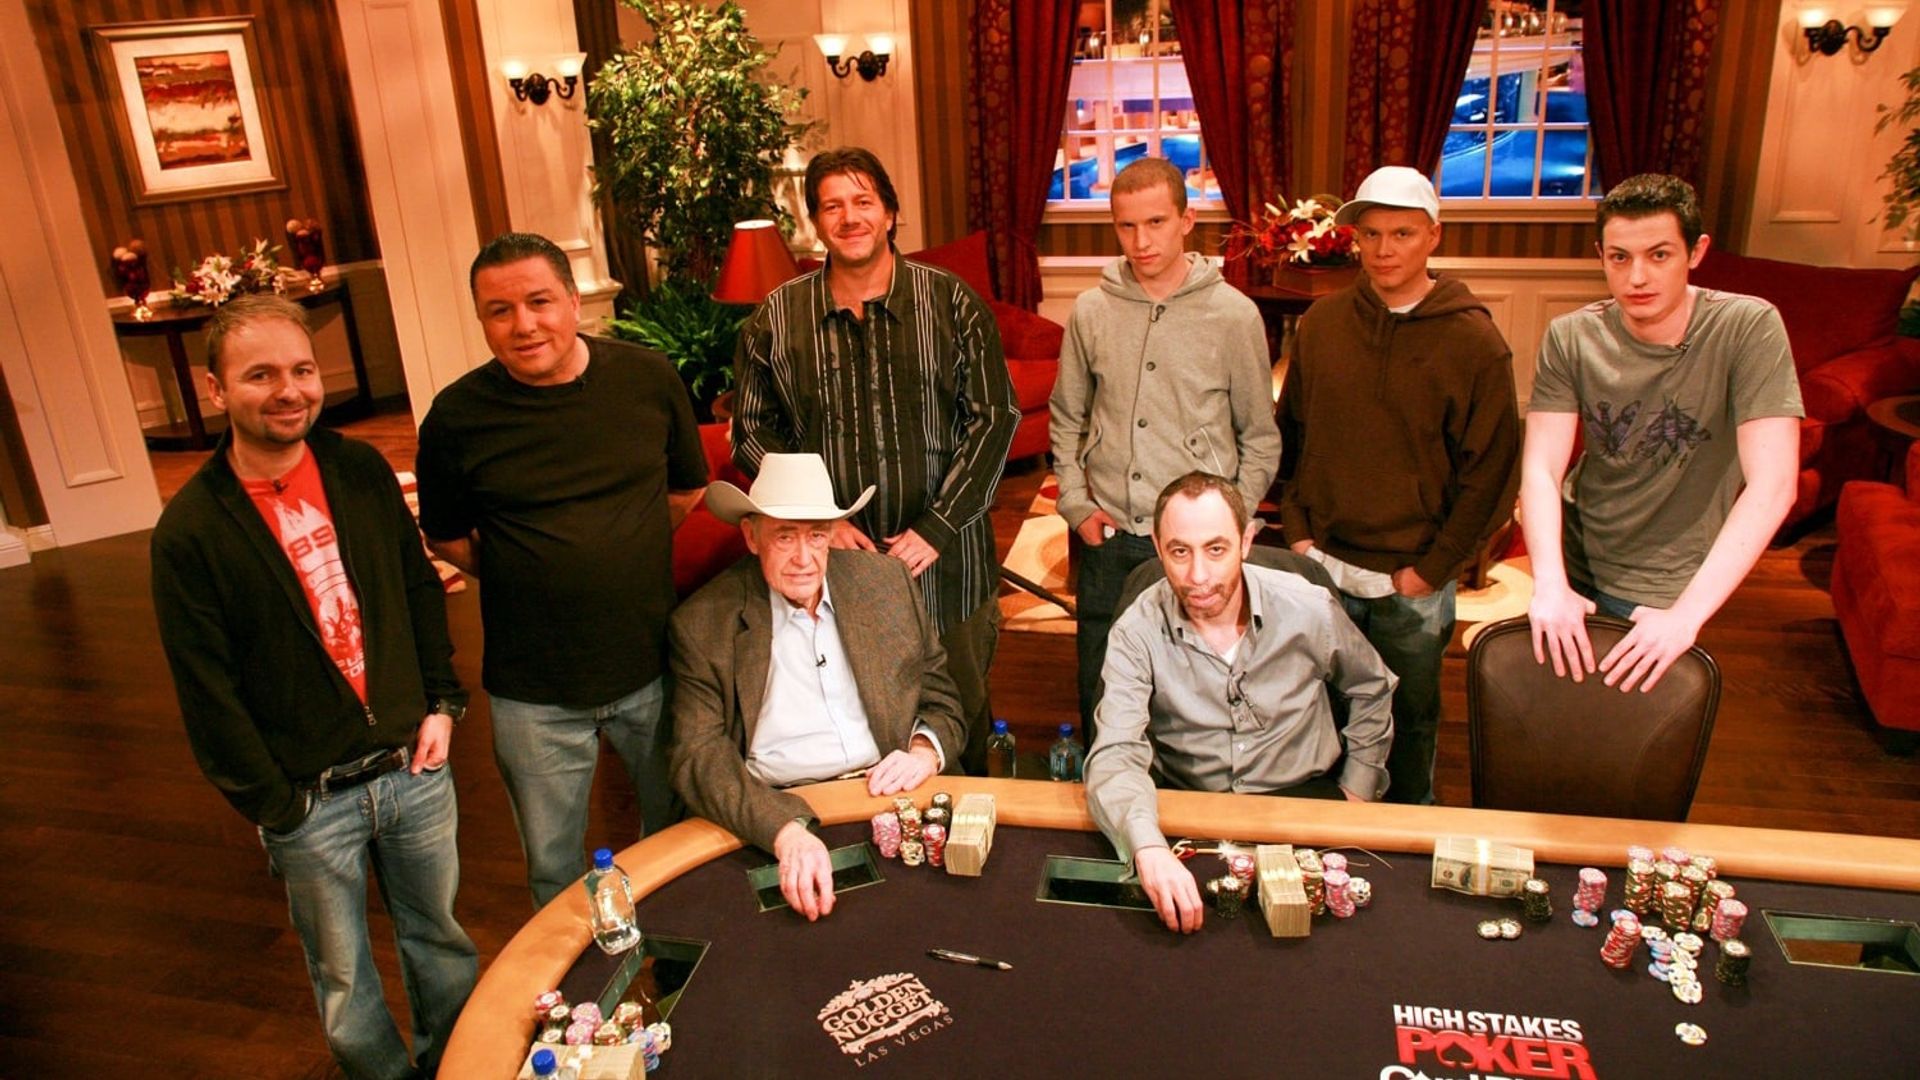 High Stakes Poker background